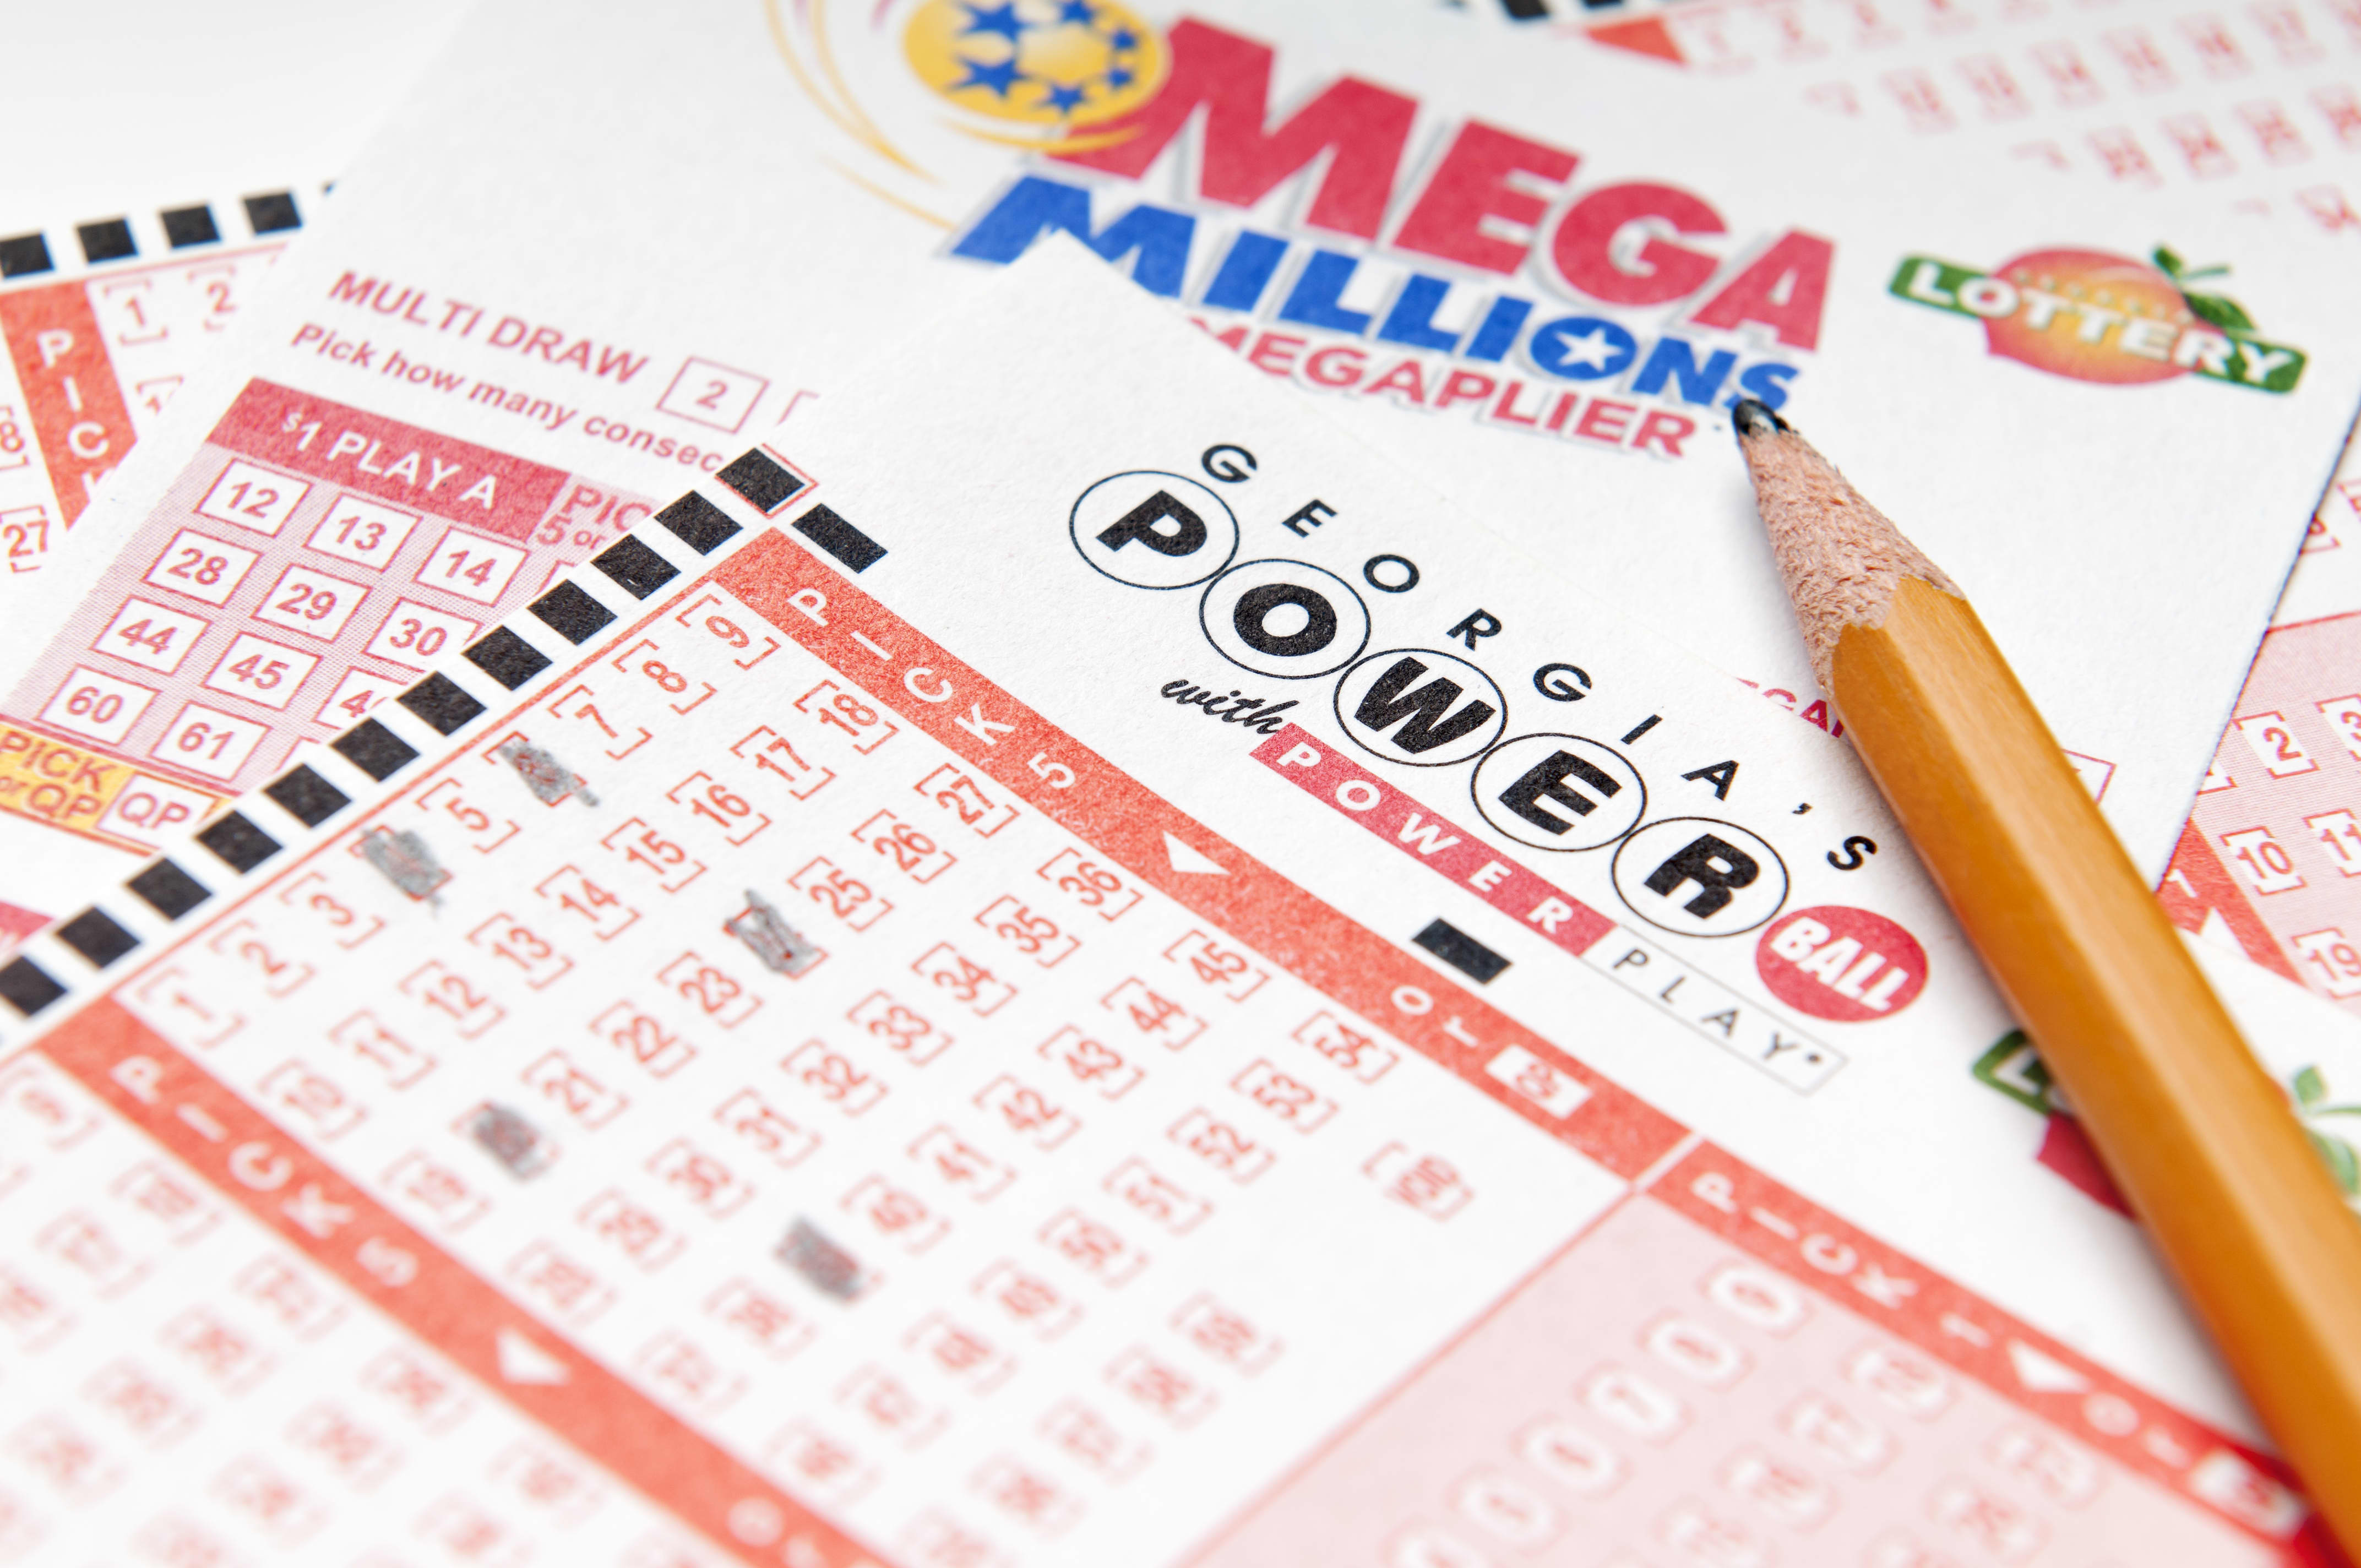 The Mega Millions and Powerball awards exceed $ 400 million